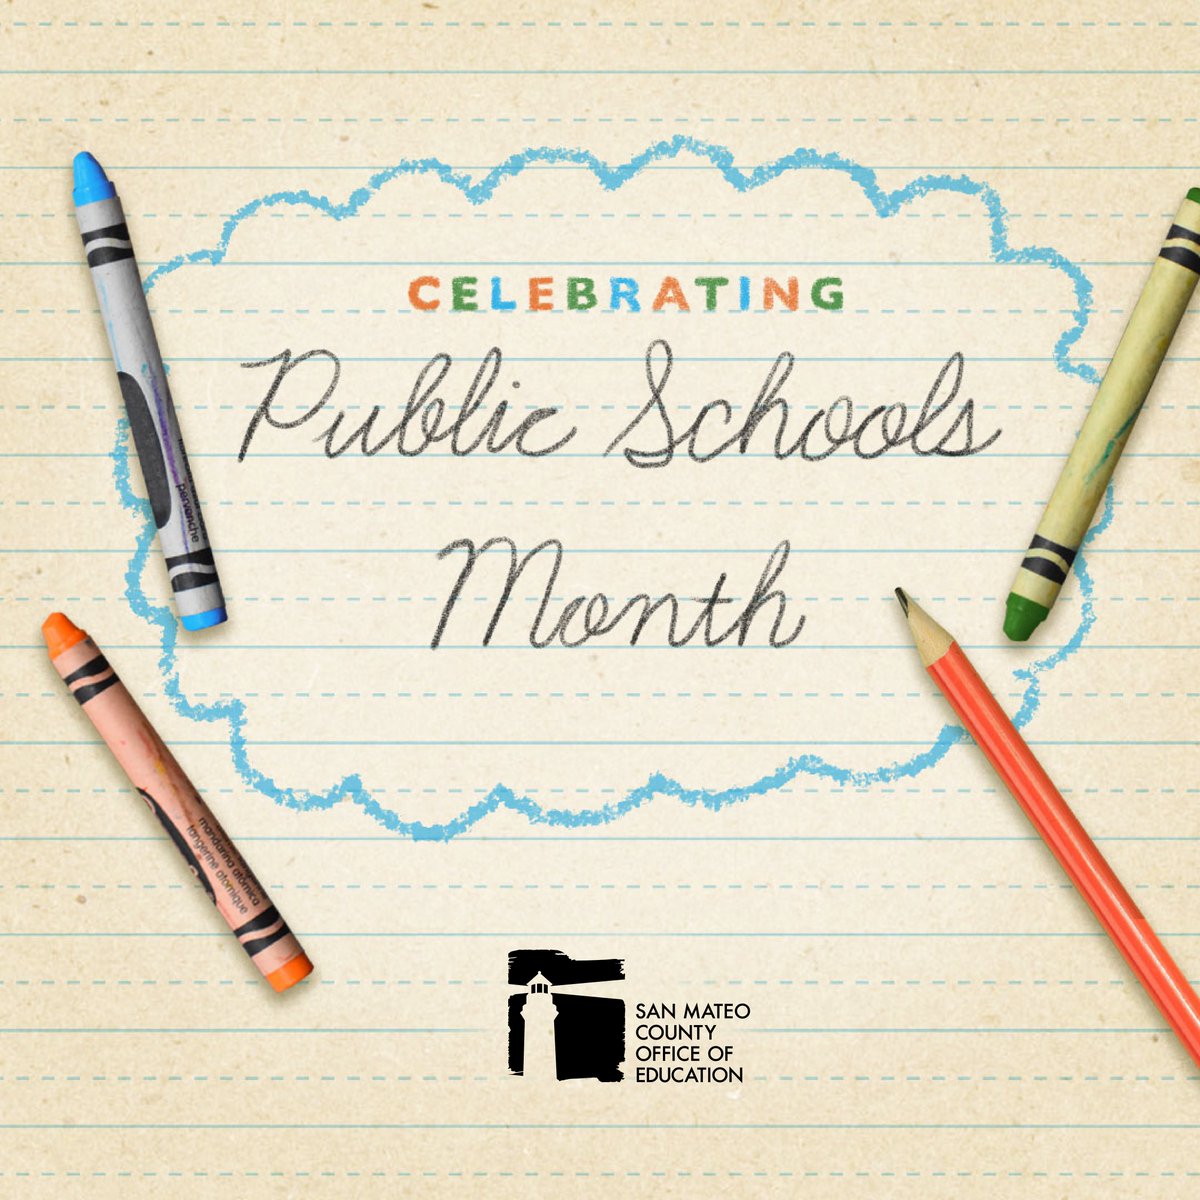 Join us in celebrating Public Schools Month! Public schools educate 9 out of 10 students and provide key resources to families and community members. Help us celebrate our public schools and their role in shaping our future! #PublicSchoolsMonth #ThankYou #publiceducation